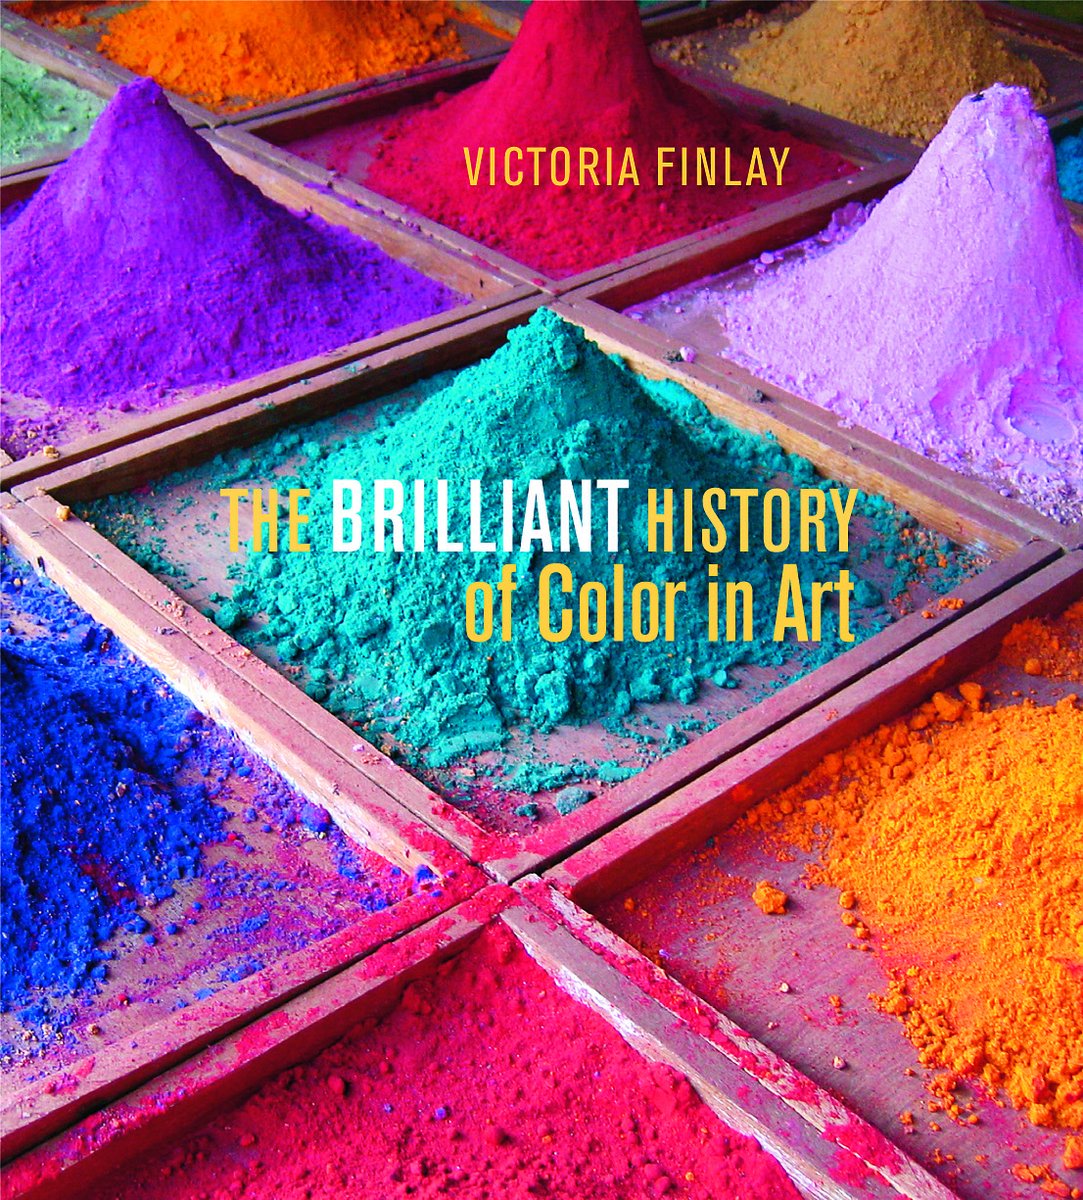 🌍 Happy Earth Day! 🌍 Celebrate by reading 'The Brilliant History of Color in Art' and exploring the stories behind Mother Nature's favorite hues, such as Red ocher, green earth, Indian yellow, and lead white. Learn more here: gty.art/3Un6pYl